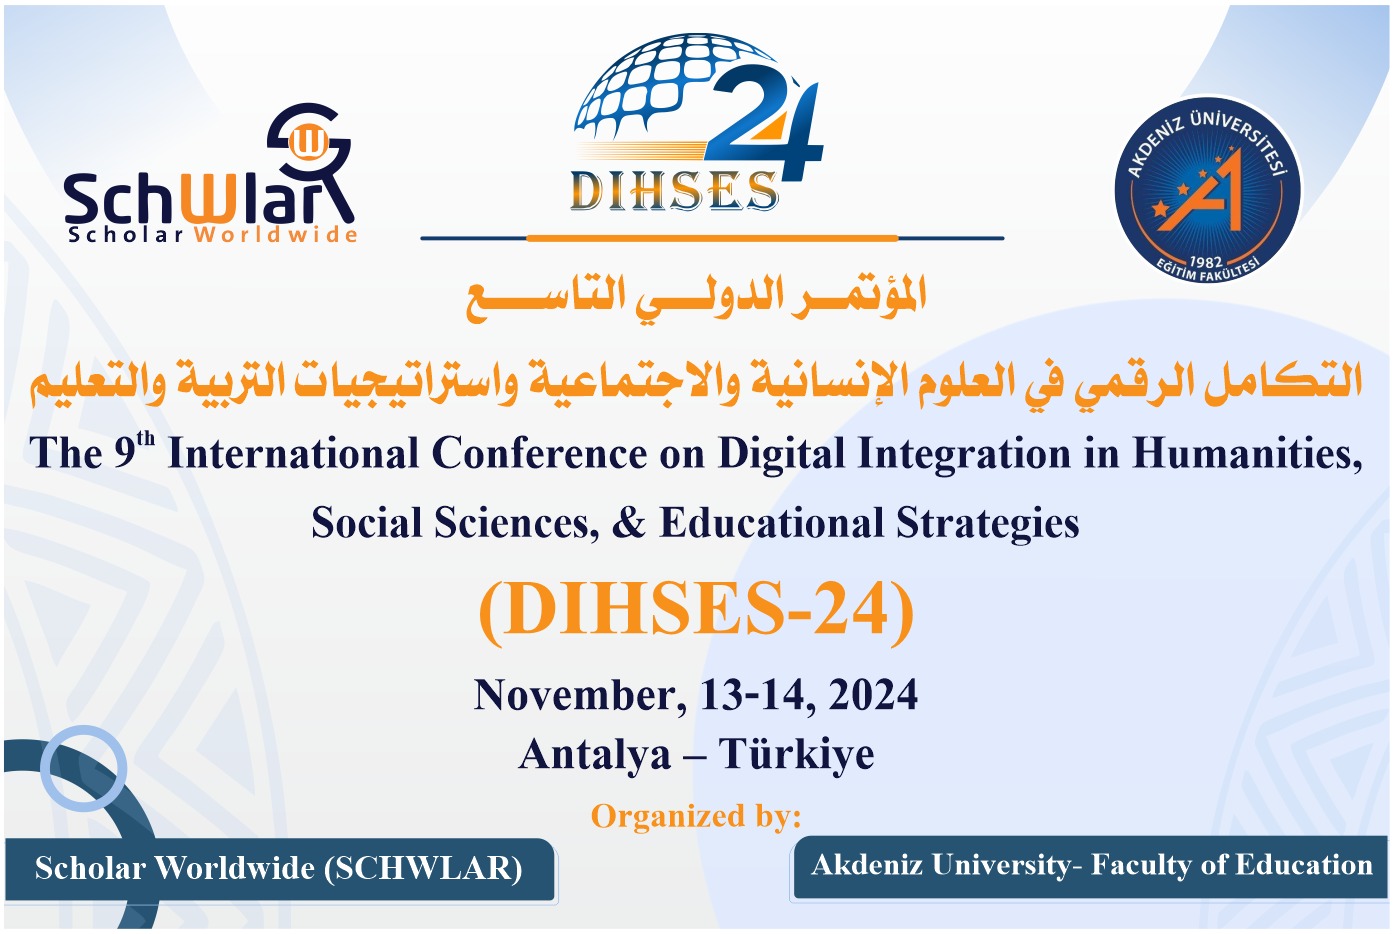 The 9th International Conference On Digital Integration in Humanities, Social Sciences, & Educational Strategies (DIHSES-24)